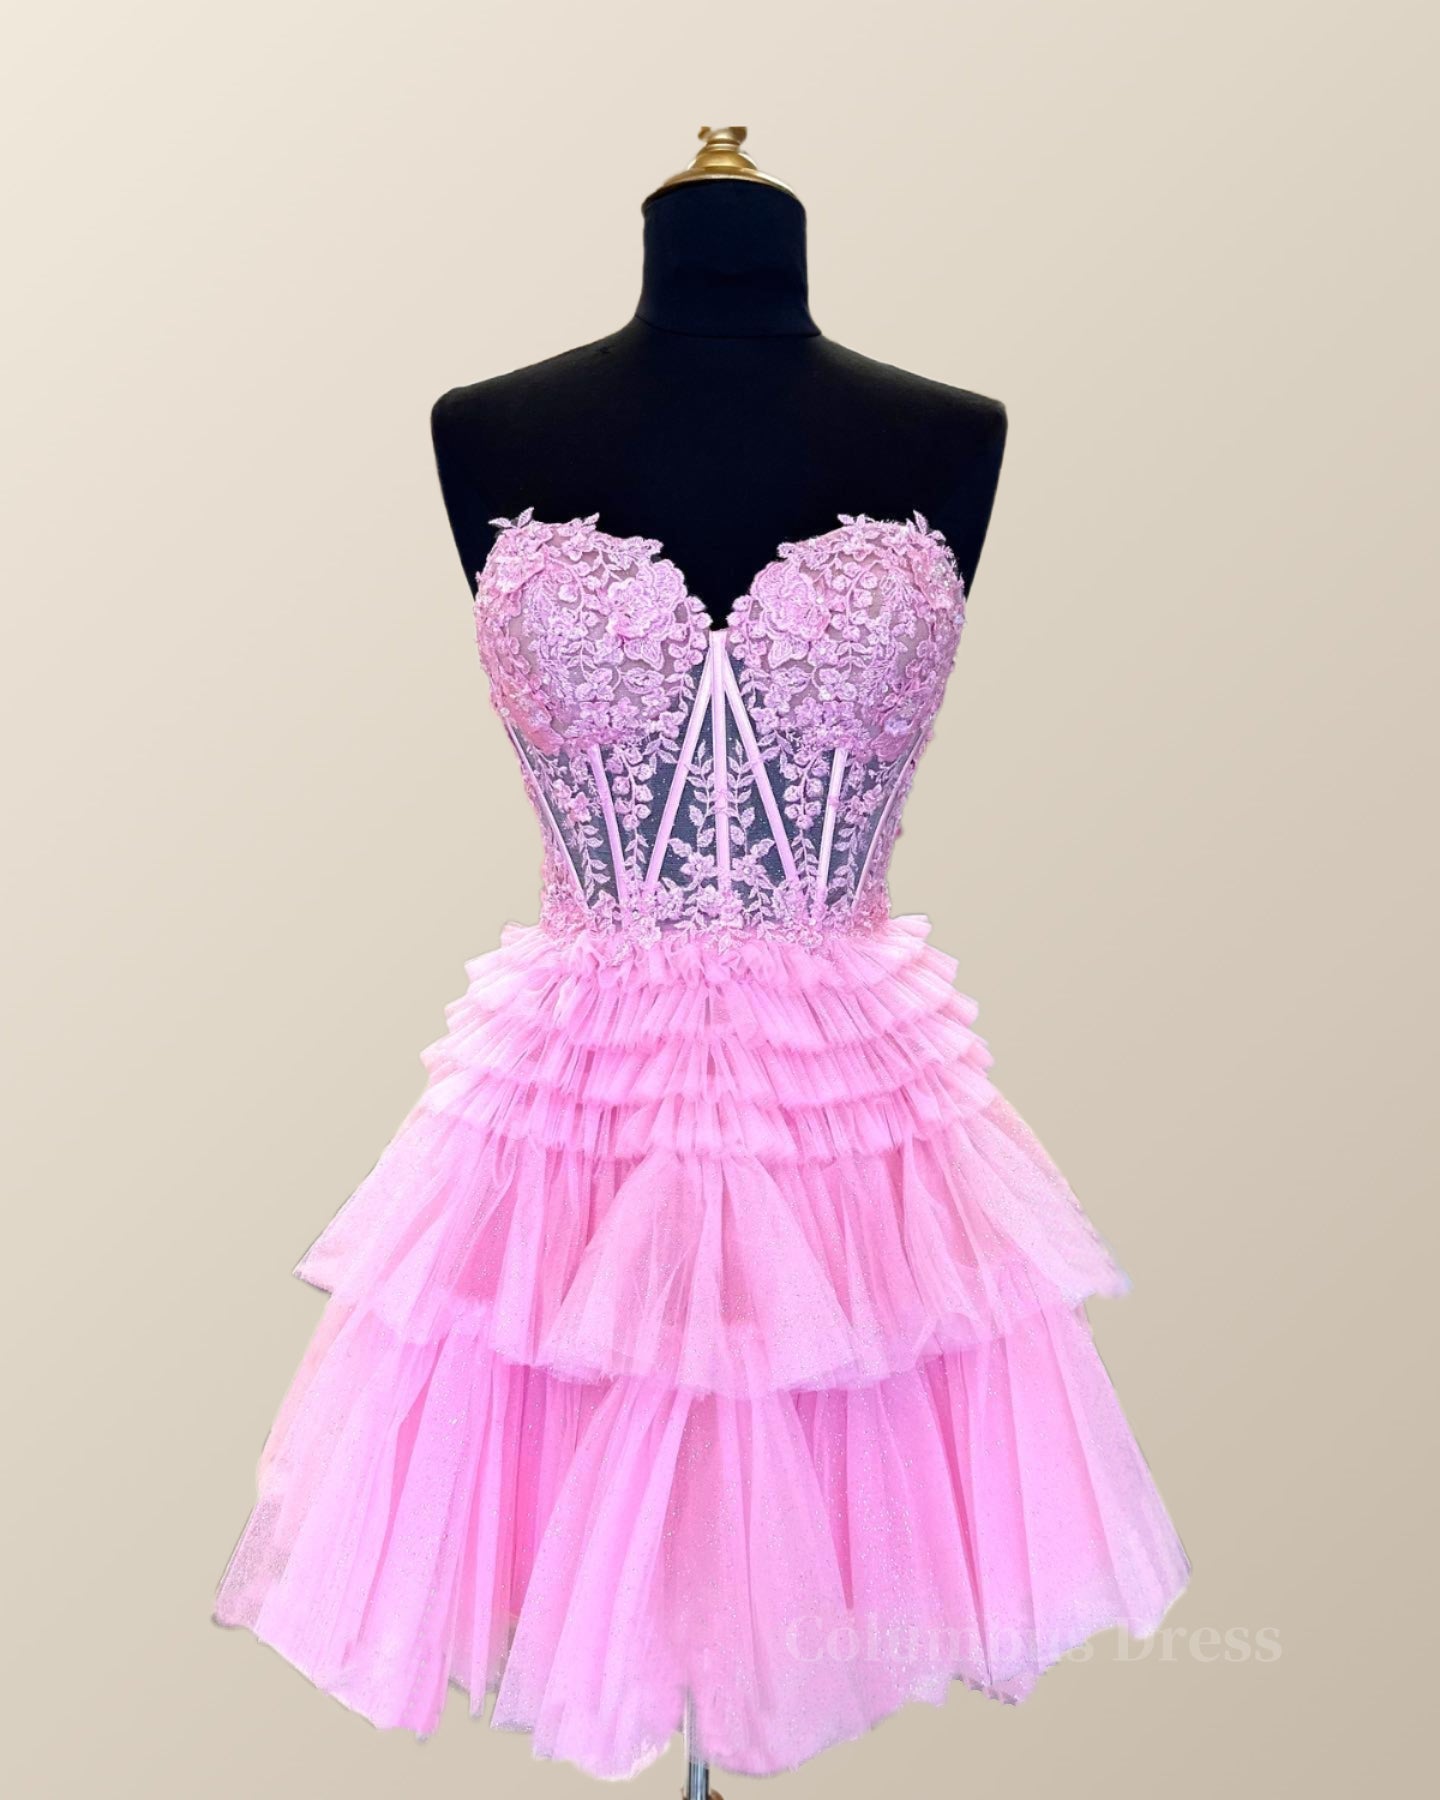 Girlie Dress, Pink Sweetheart Lace and Ruffles Short Tulle Dress